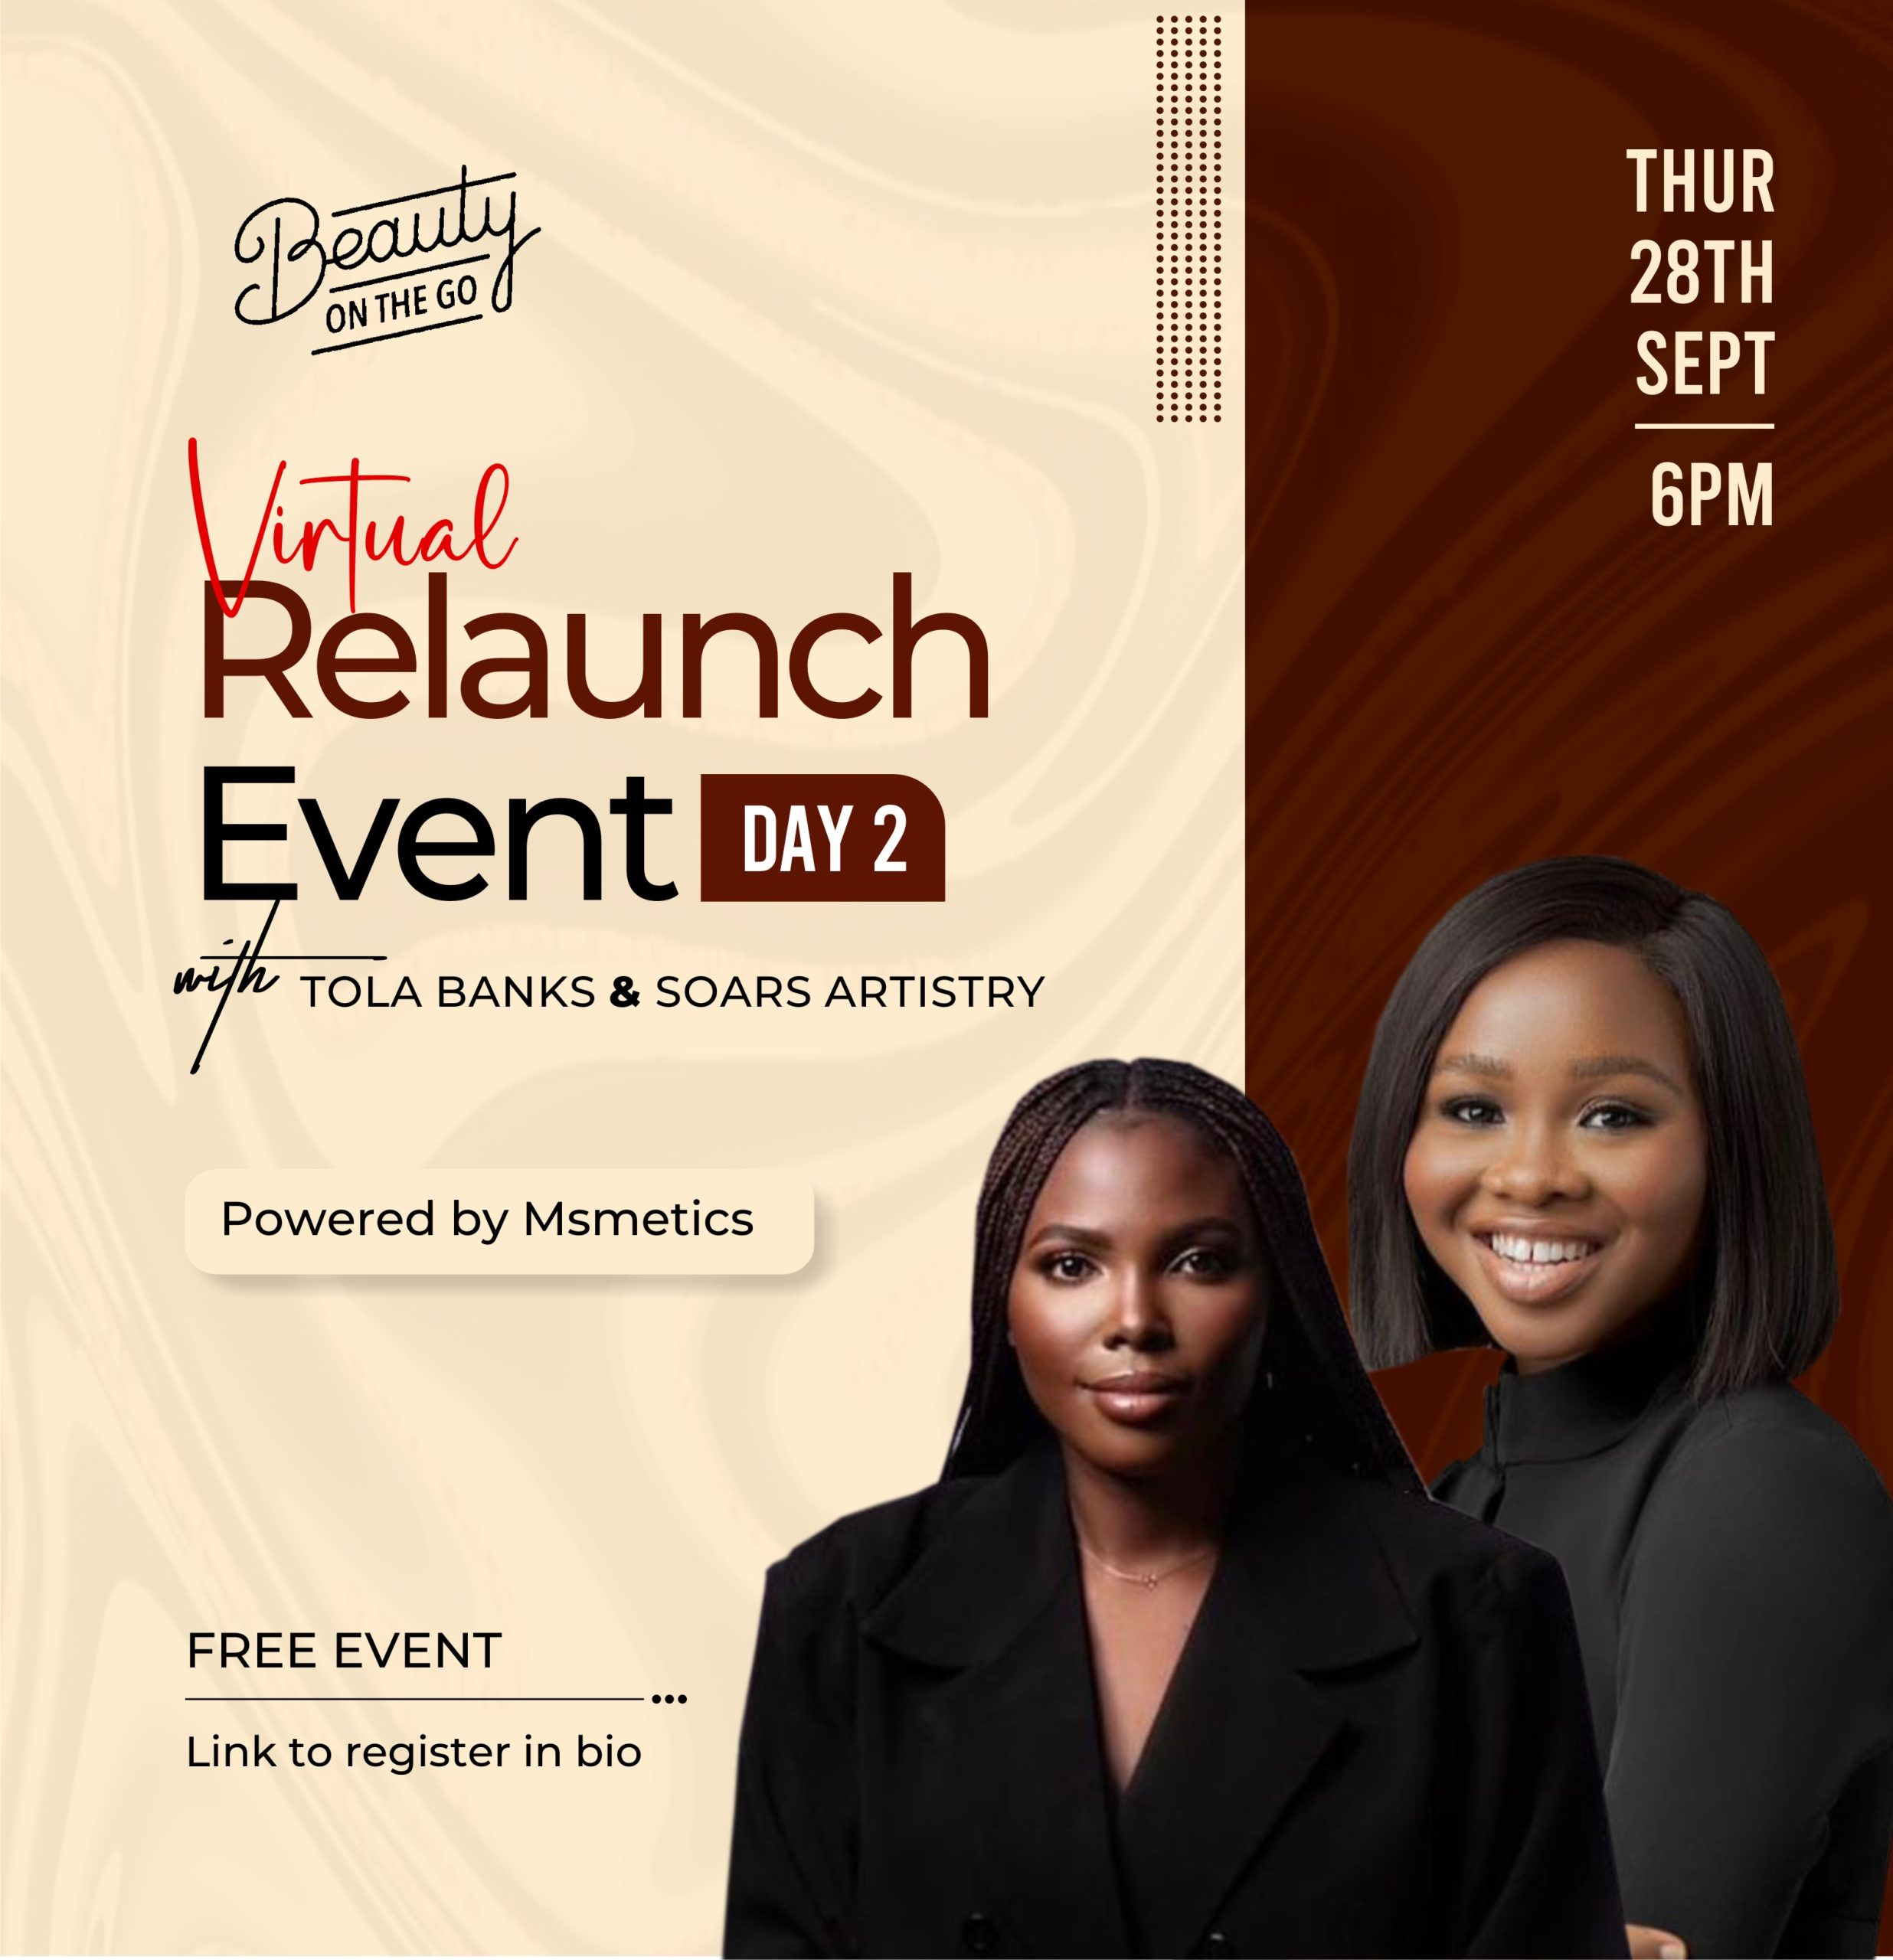 The Relaunch Day 2 with Soars Artistry & TolaBanks